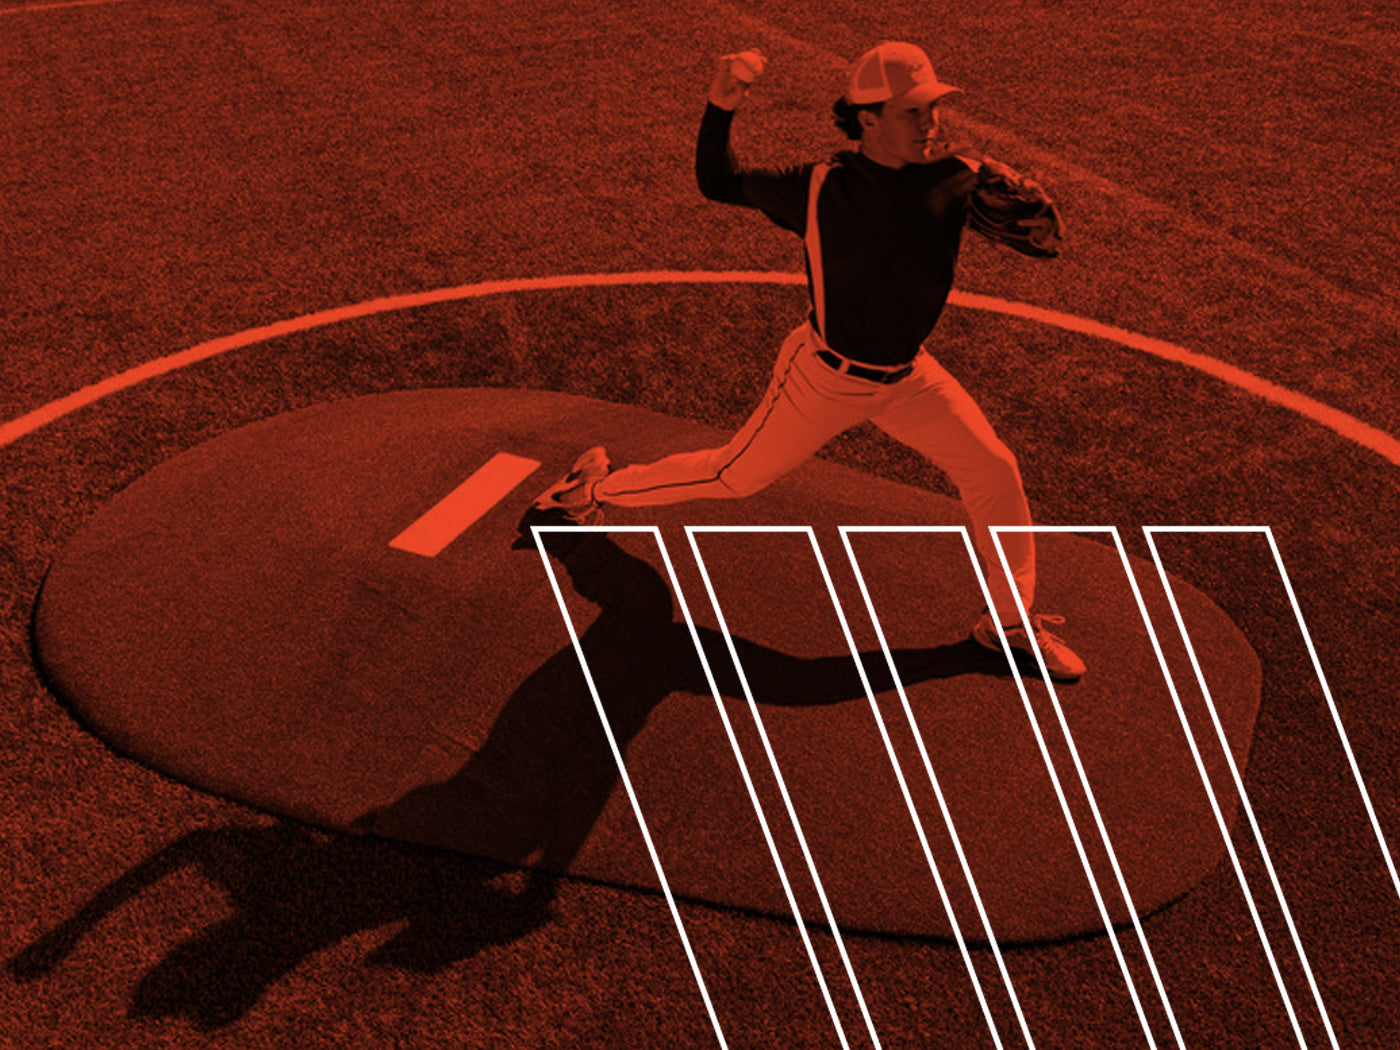 Pitching Mound Buyer's Guide - Best Pitching Mounds - Anytime Baseball Supply